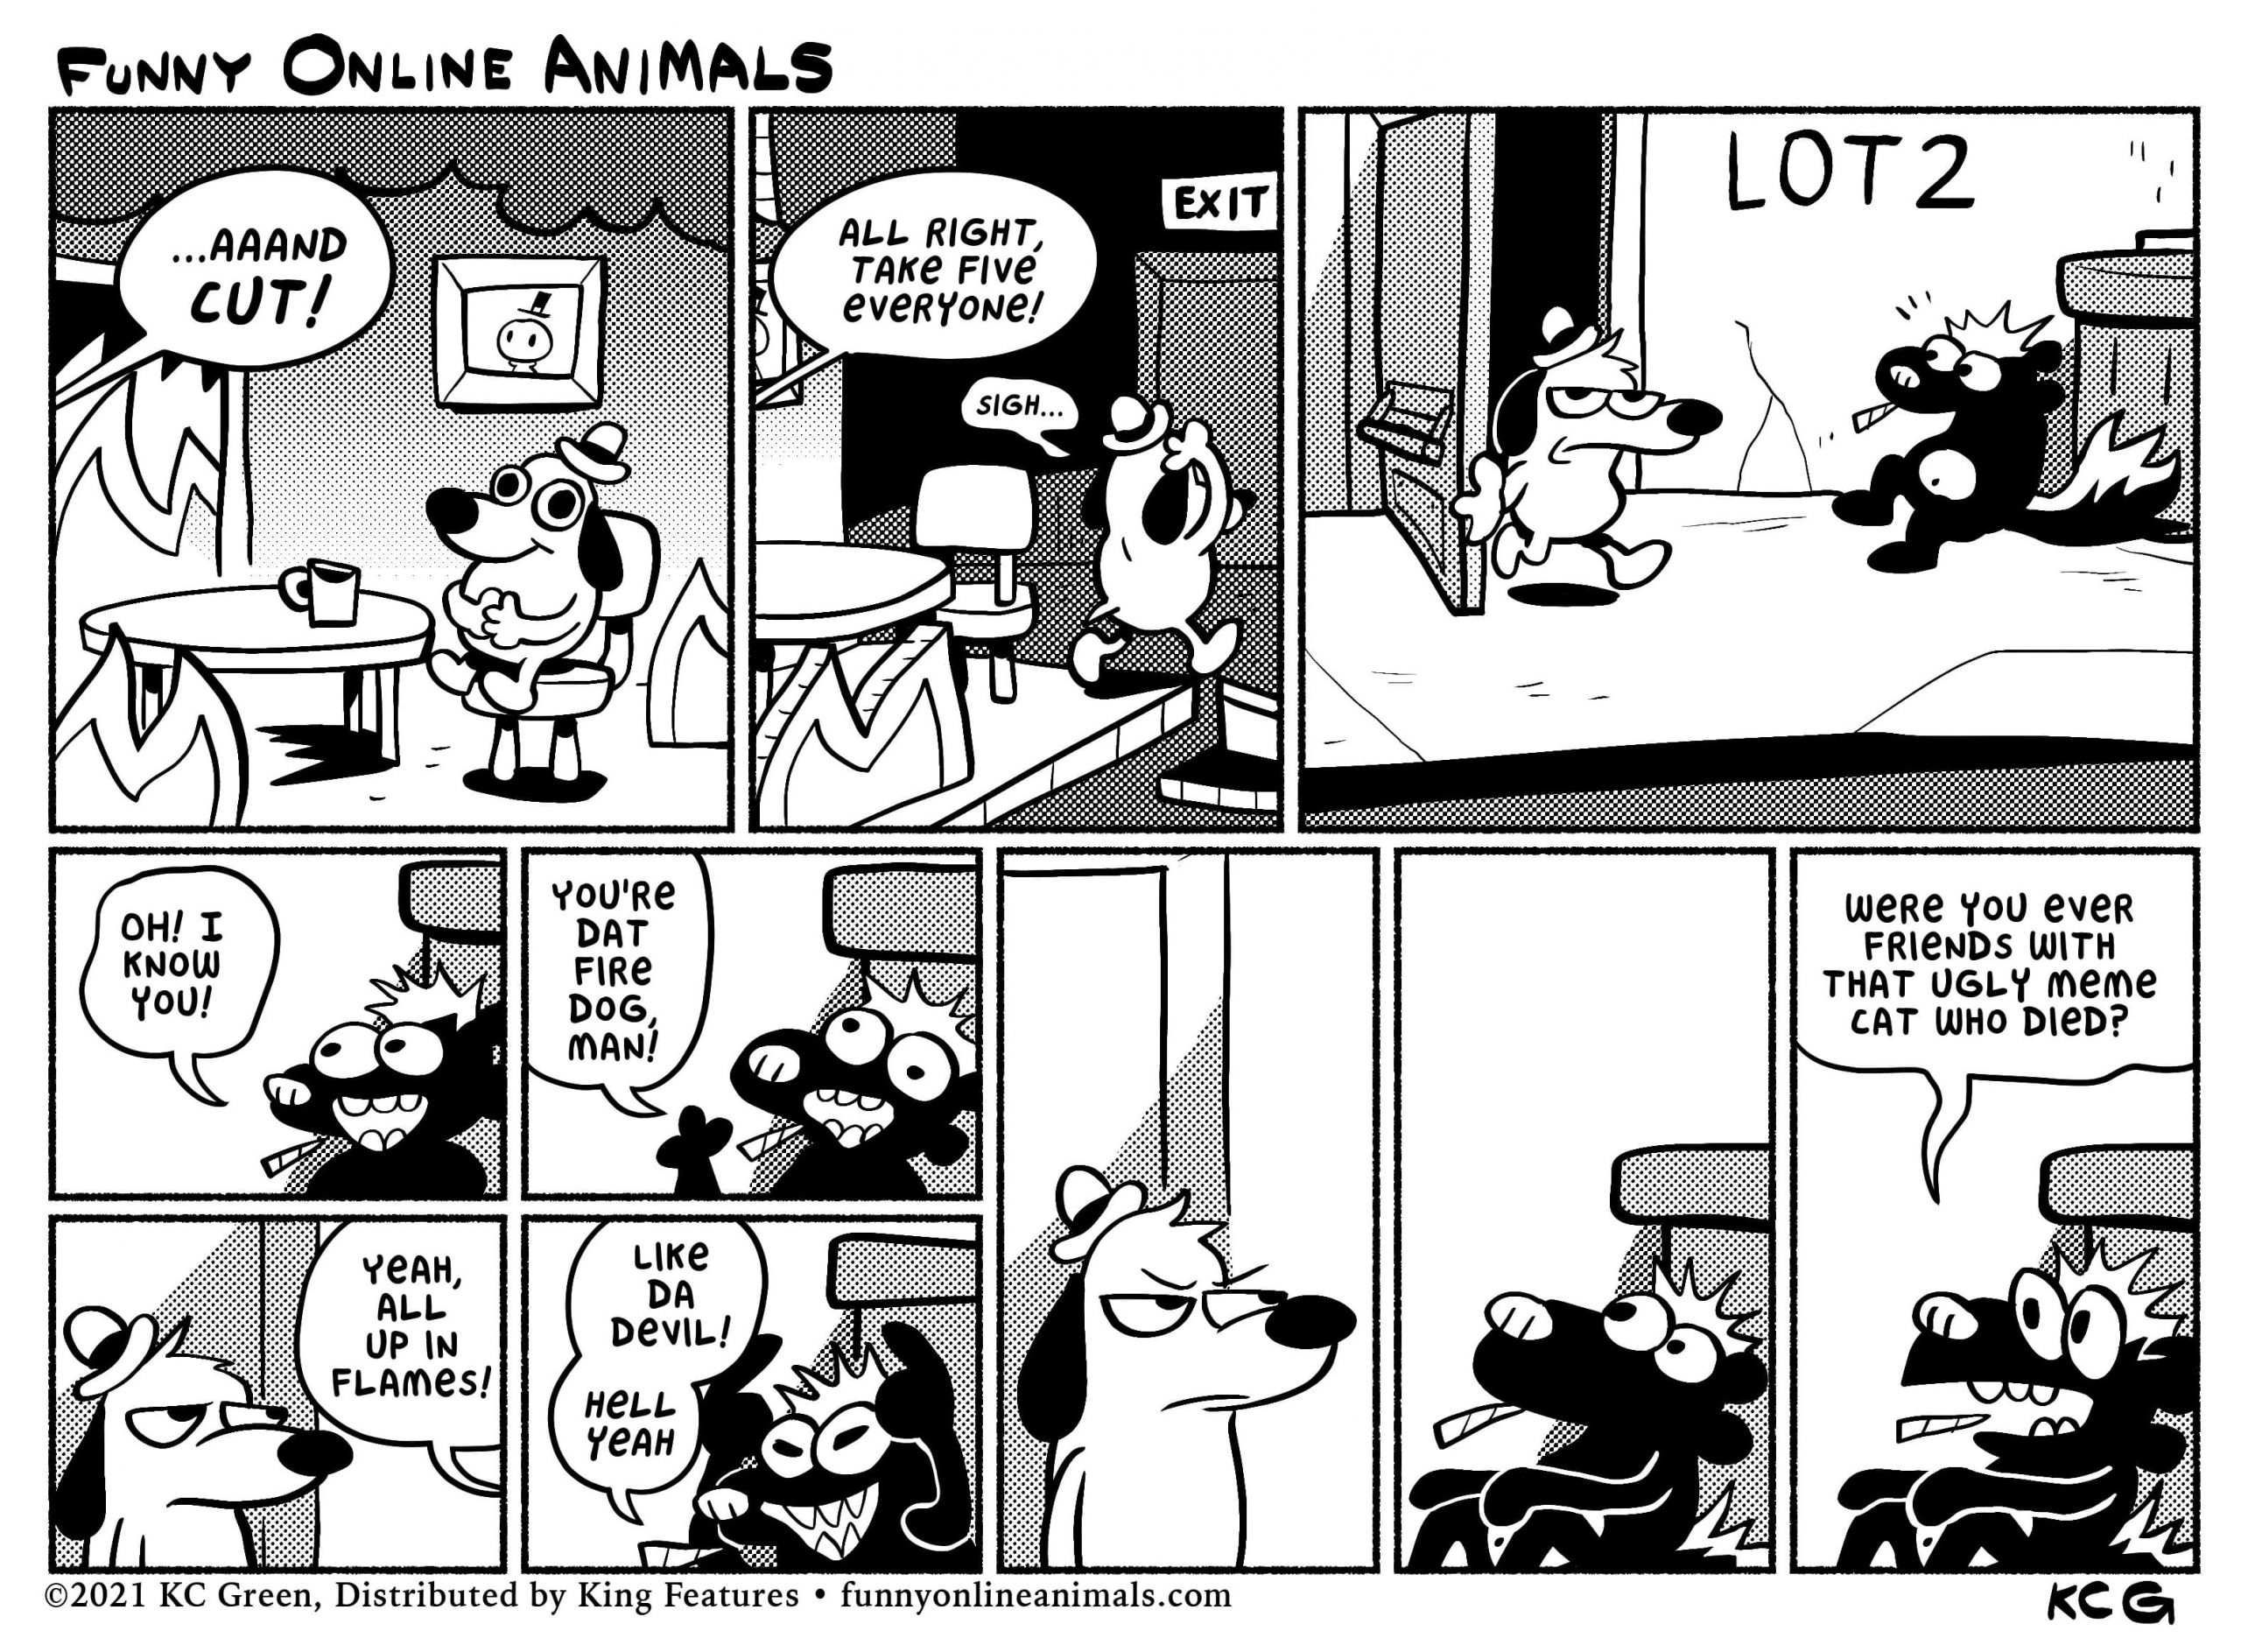 Funny Online Animals by KC Green.